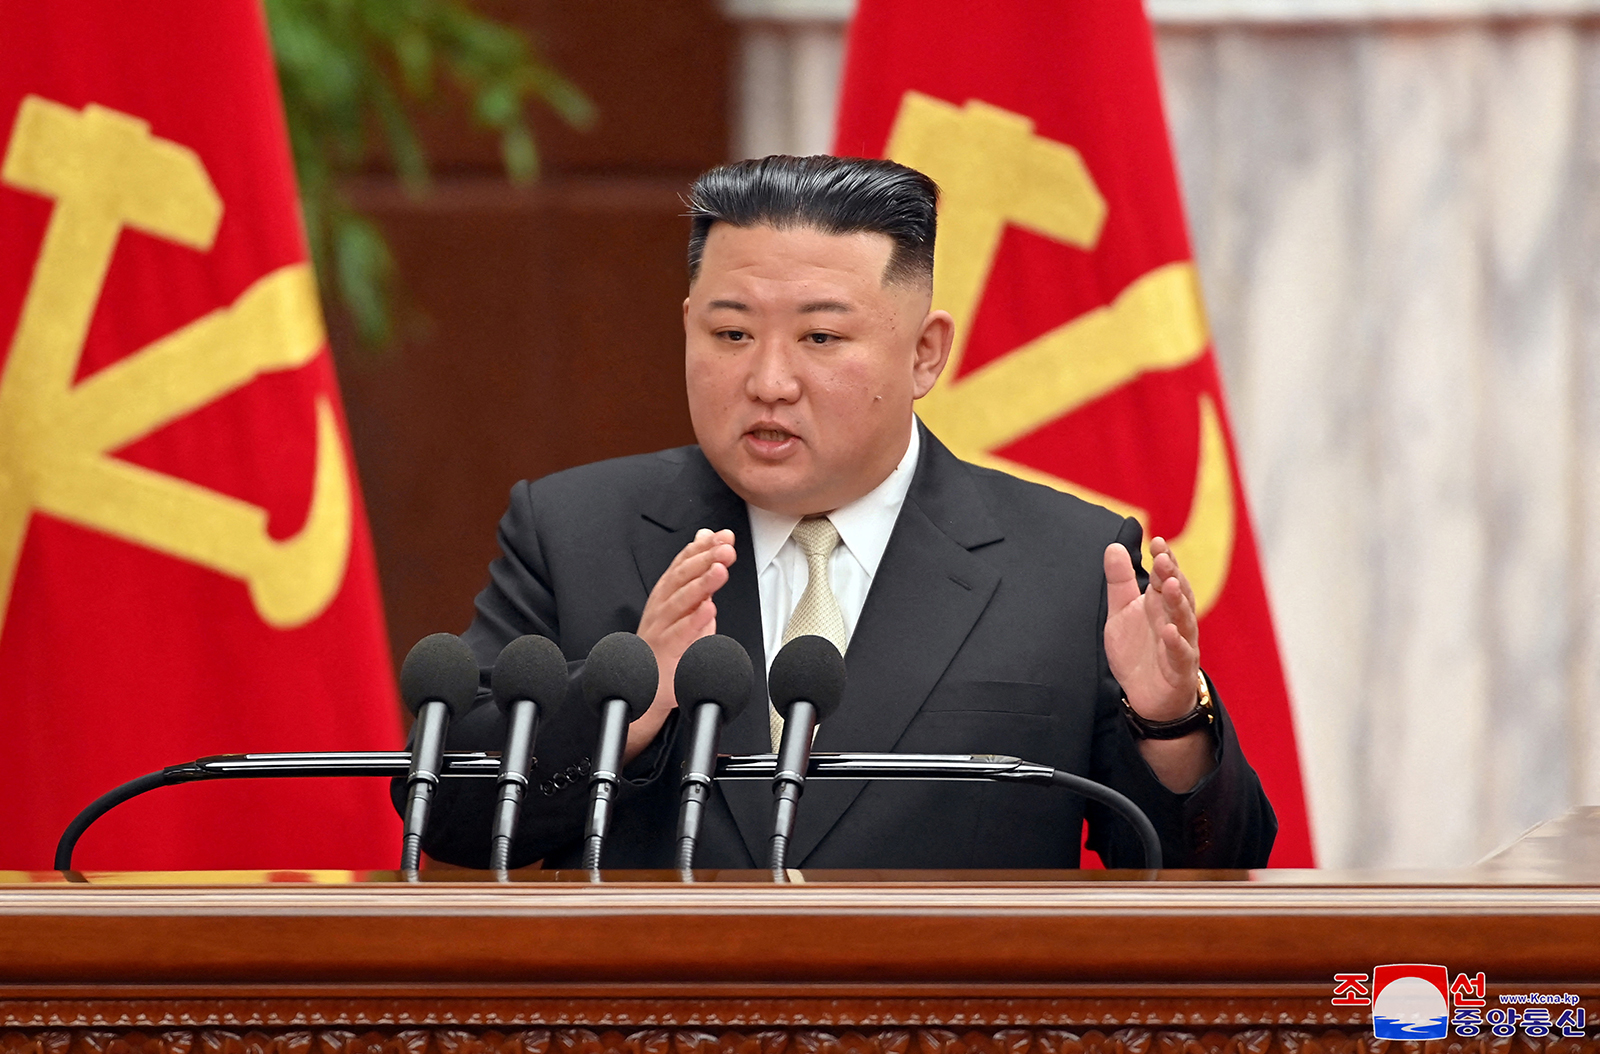 Kim Jong Un attends a meeting in Pyongyang, North Korea, on March 1.